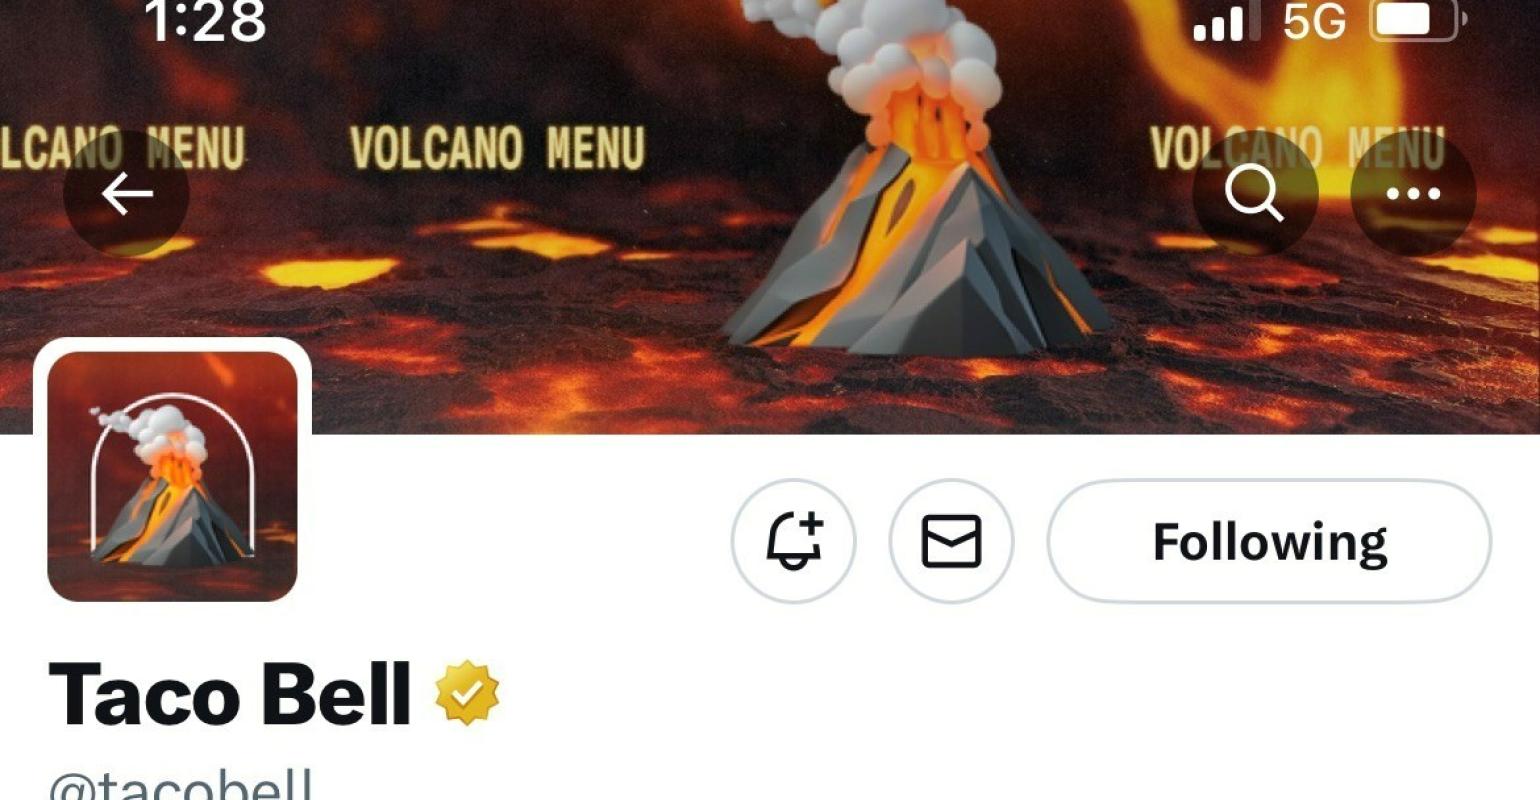 Taco Bell is bringing back its Volcano Menu this summer Nation's